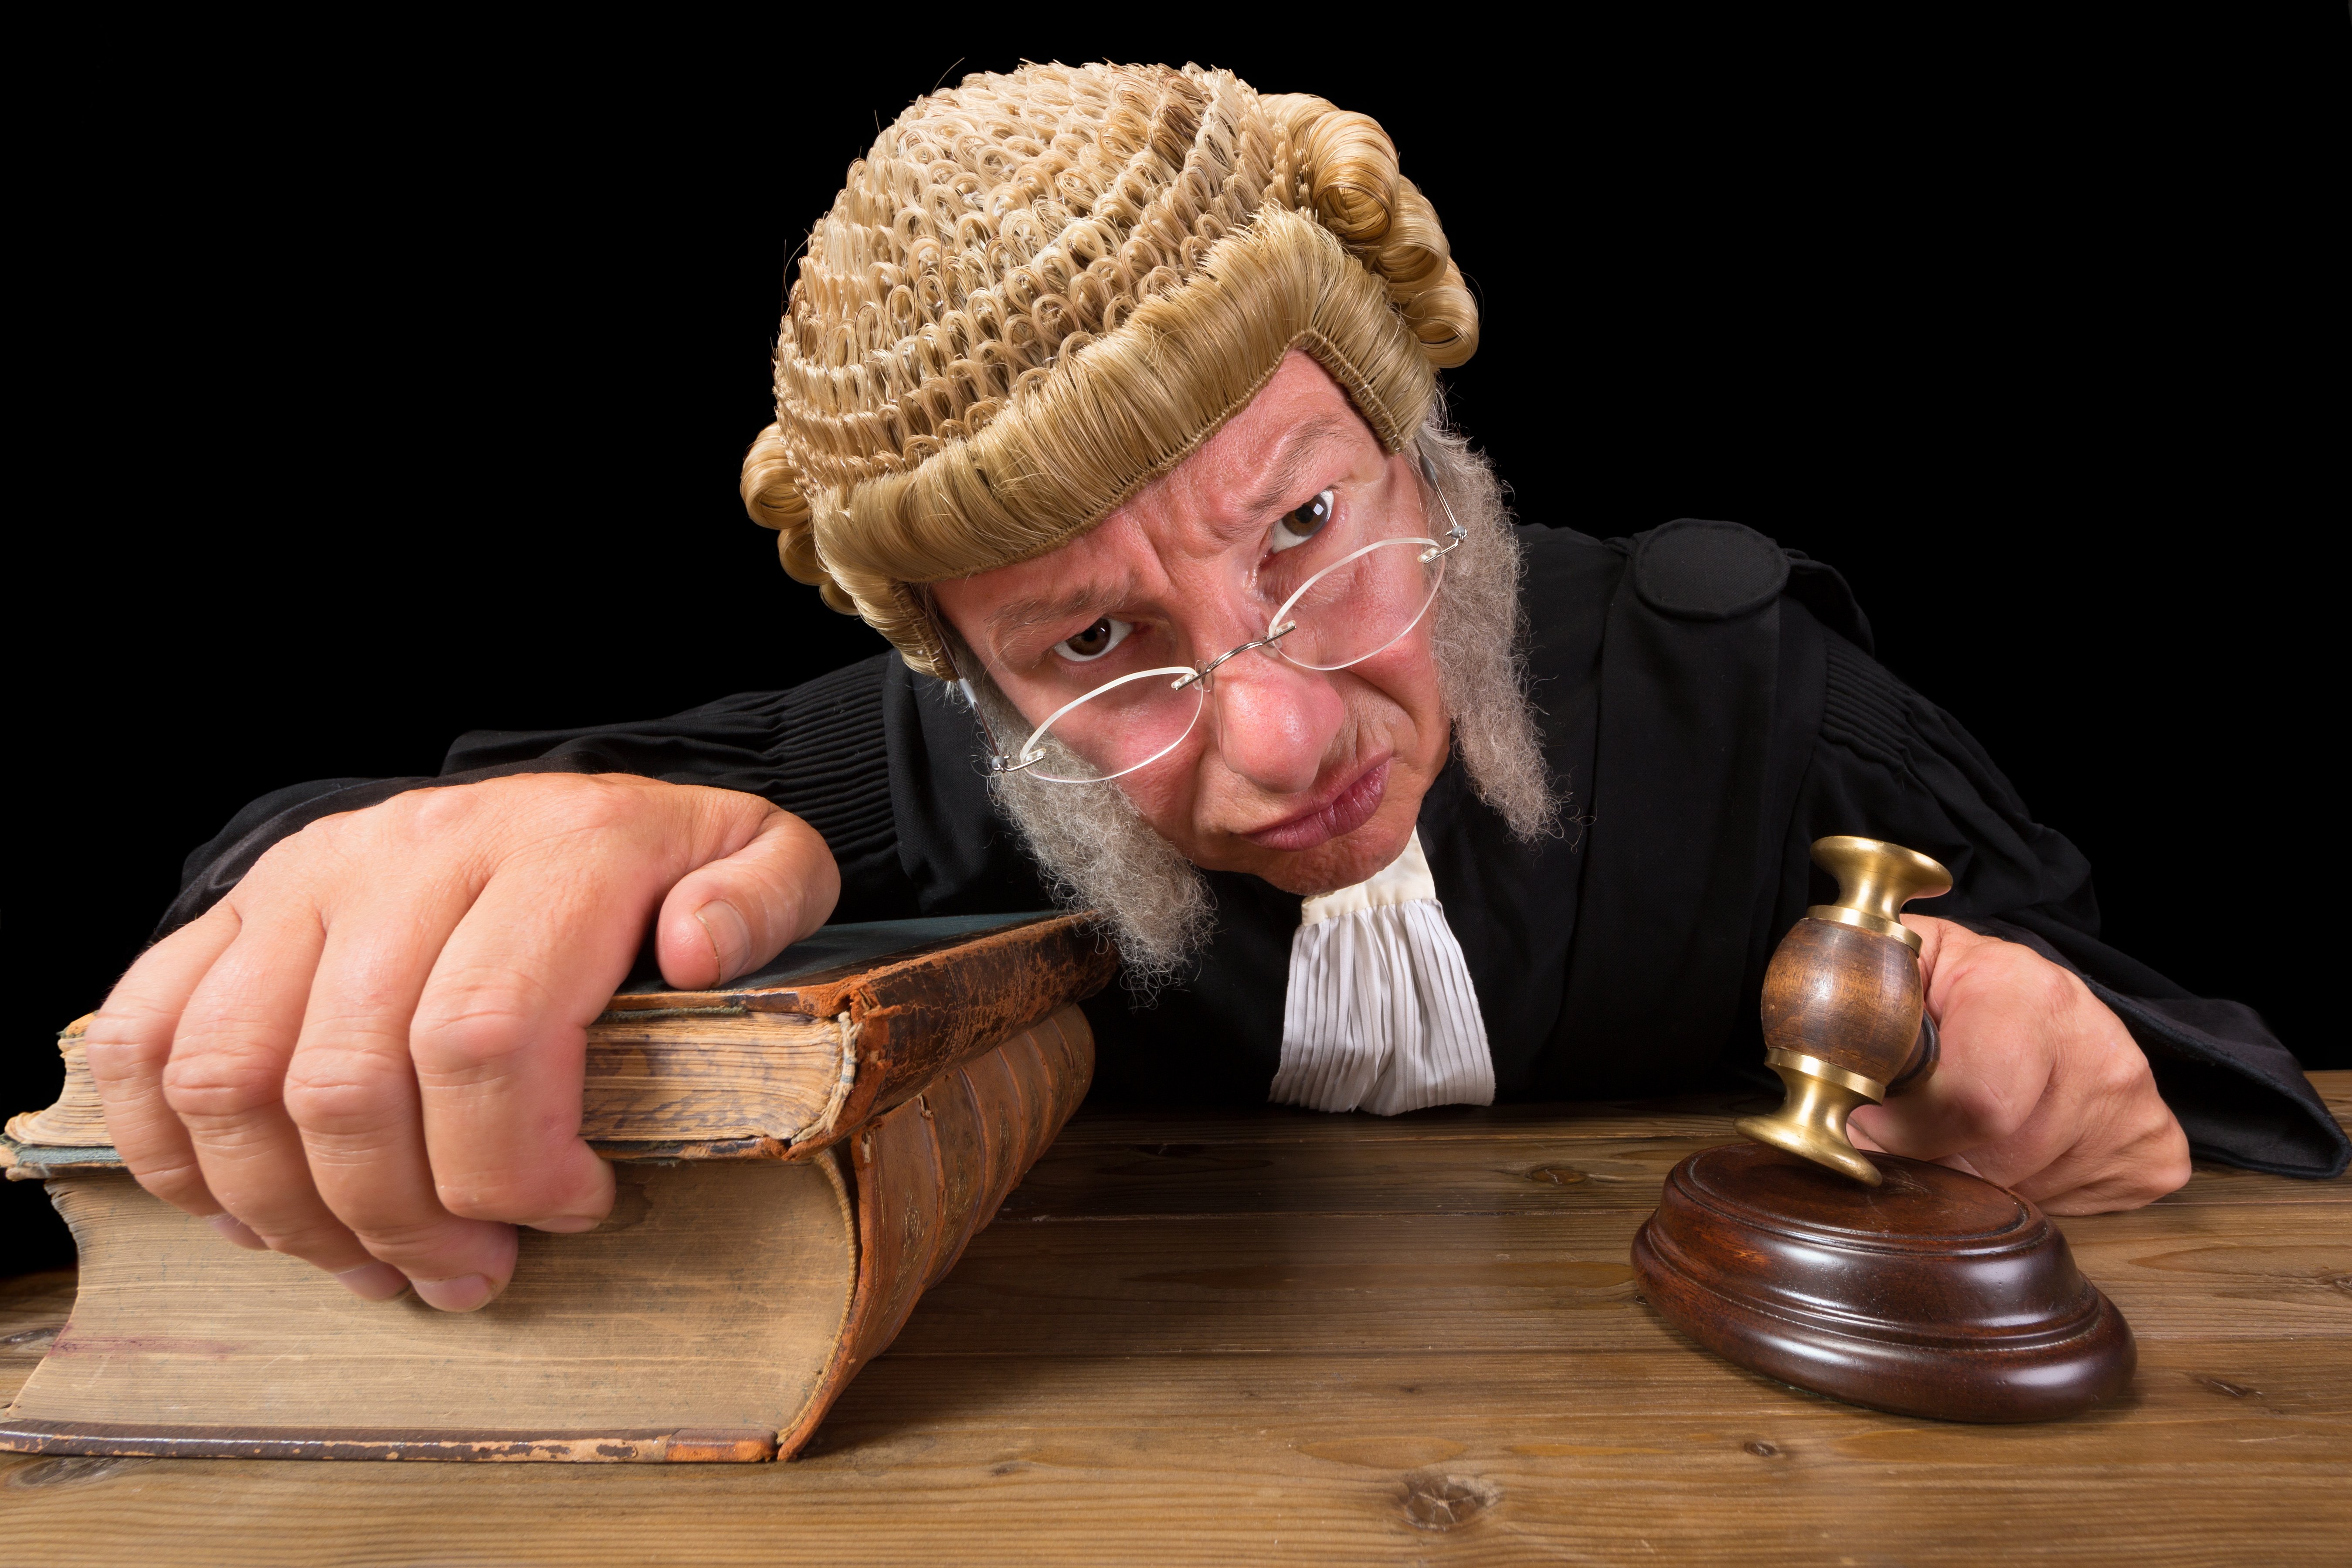 Angry judge with a hammer and a wig, holding legal tomes. Image credit: Shutterstock